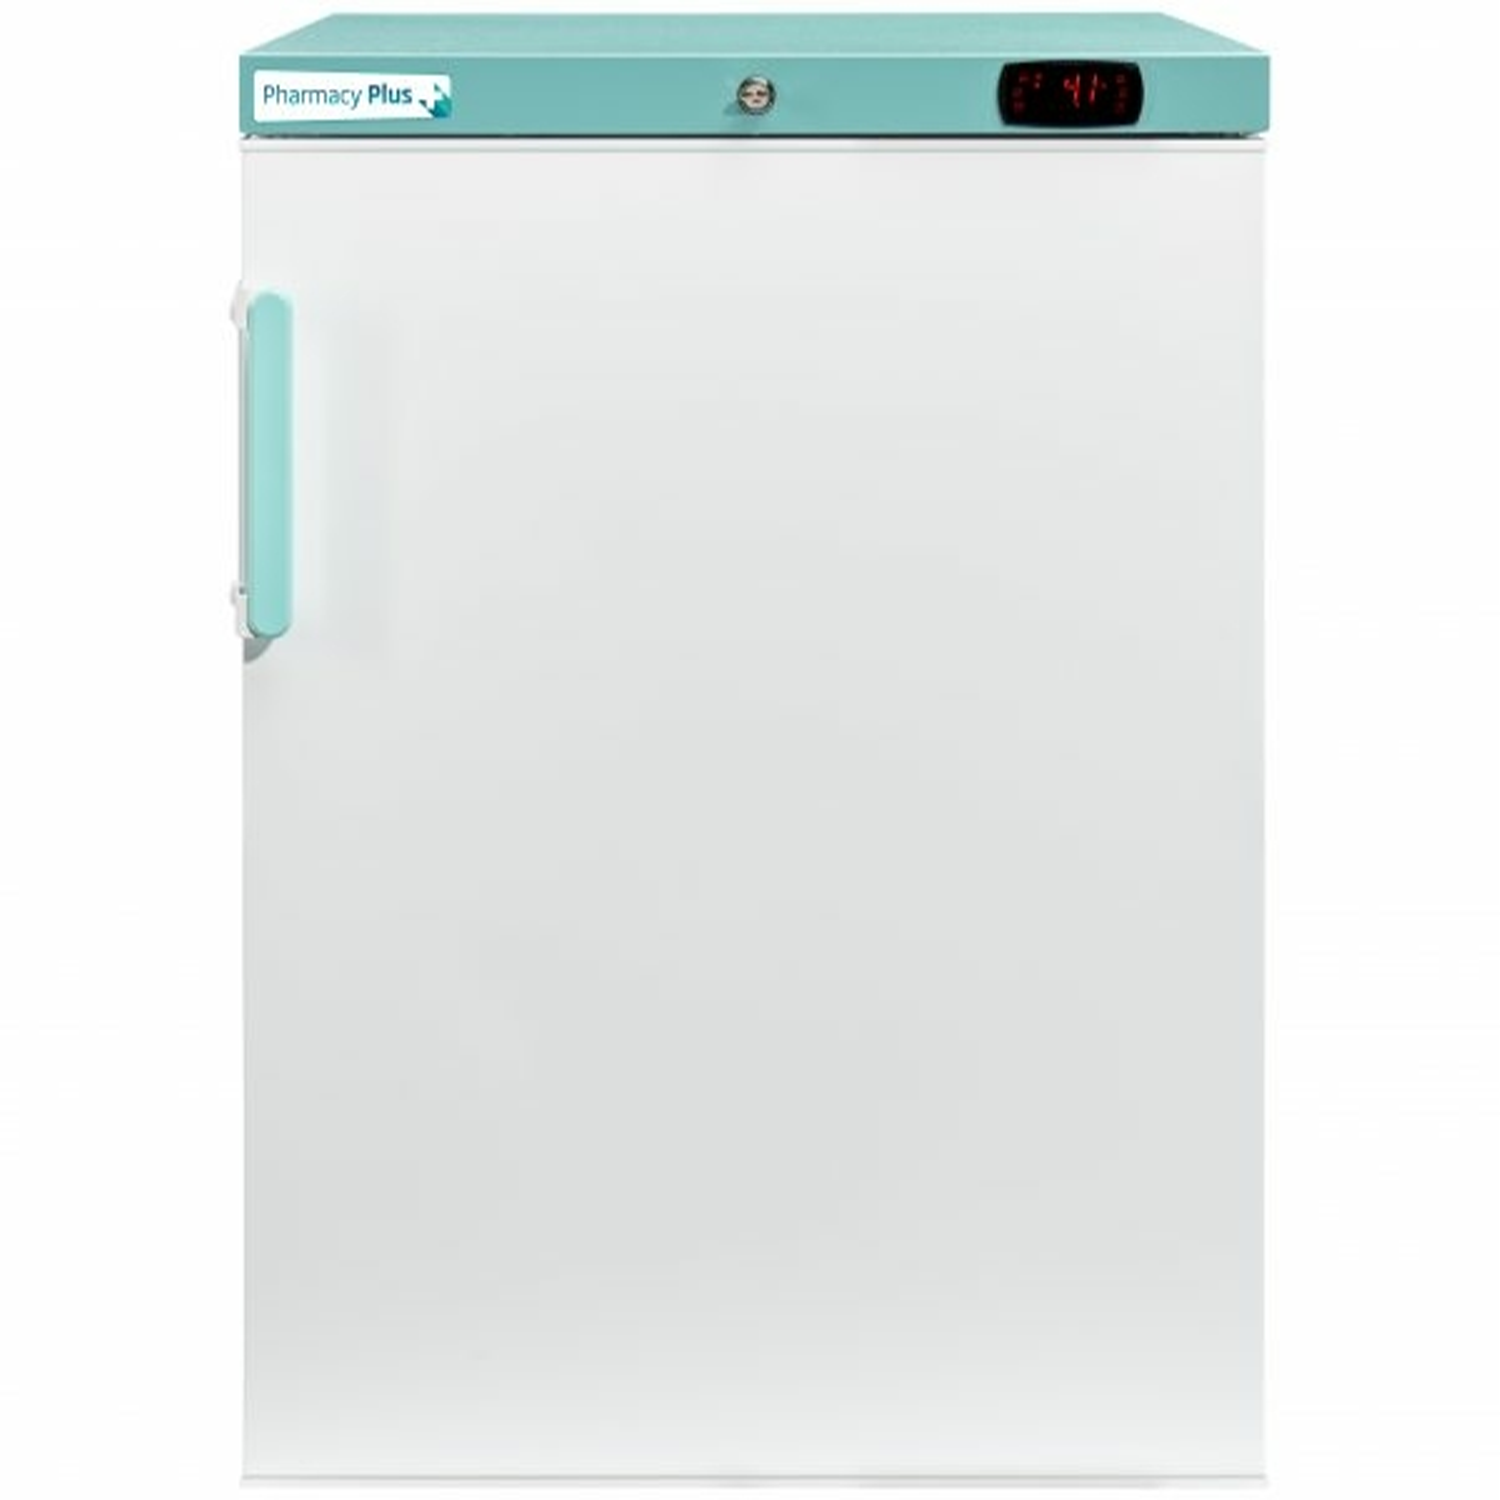 Lec Pharmacy Plus Upright Refrigerator| 158L | Bluetooth Enabled | Solid Door